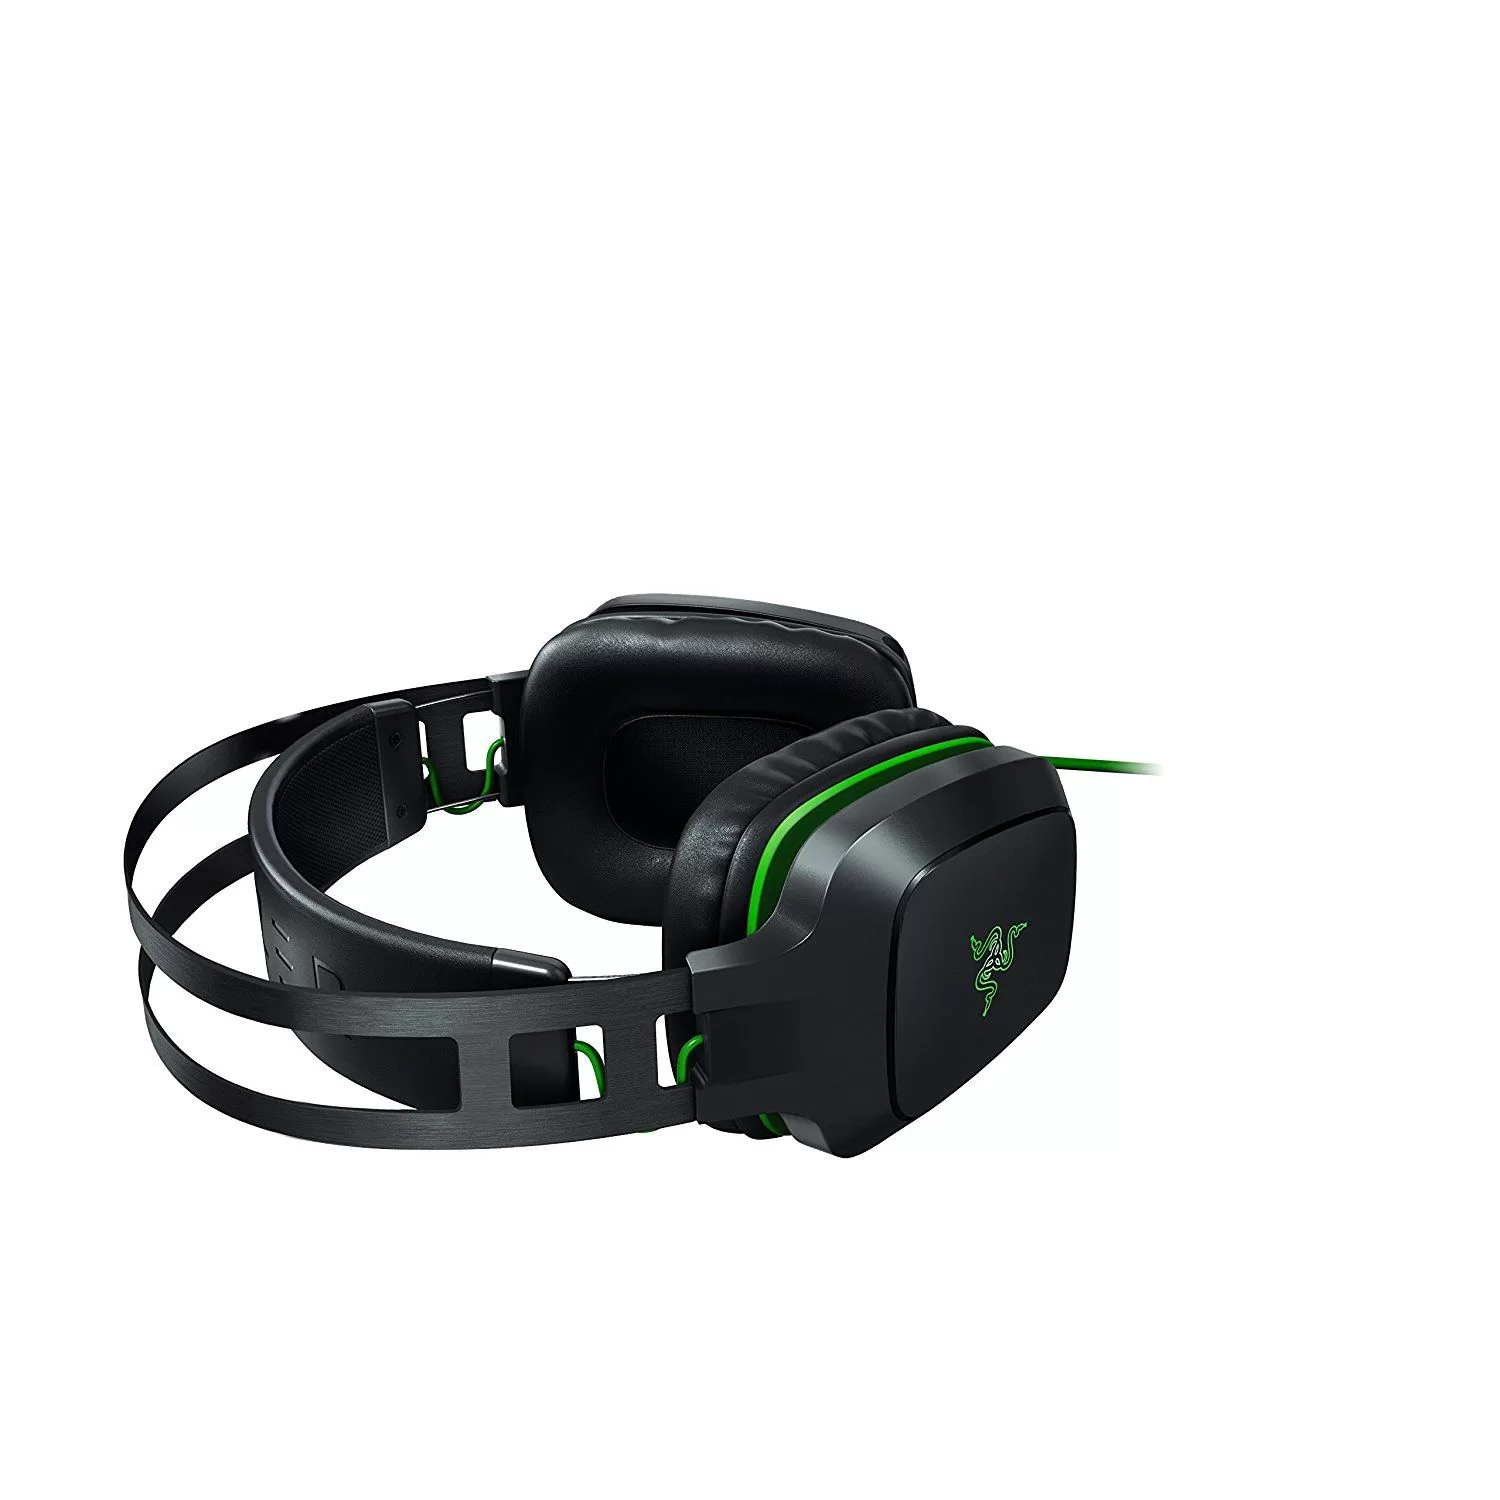 Razer Electra V2 USB gaming and music headset, OB Accessories 8